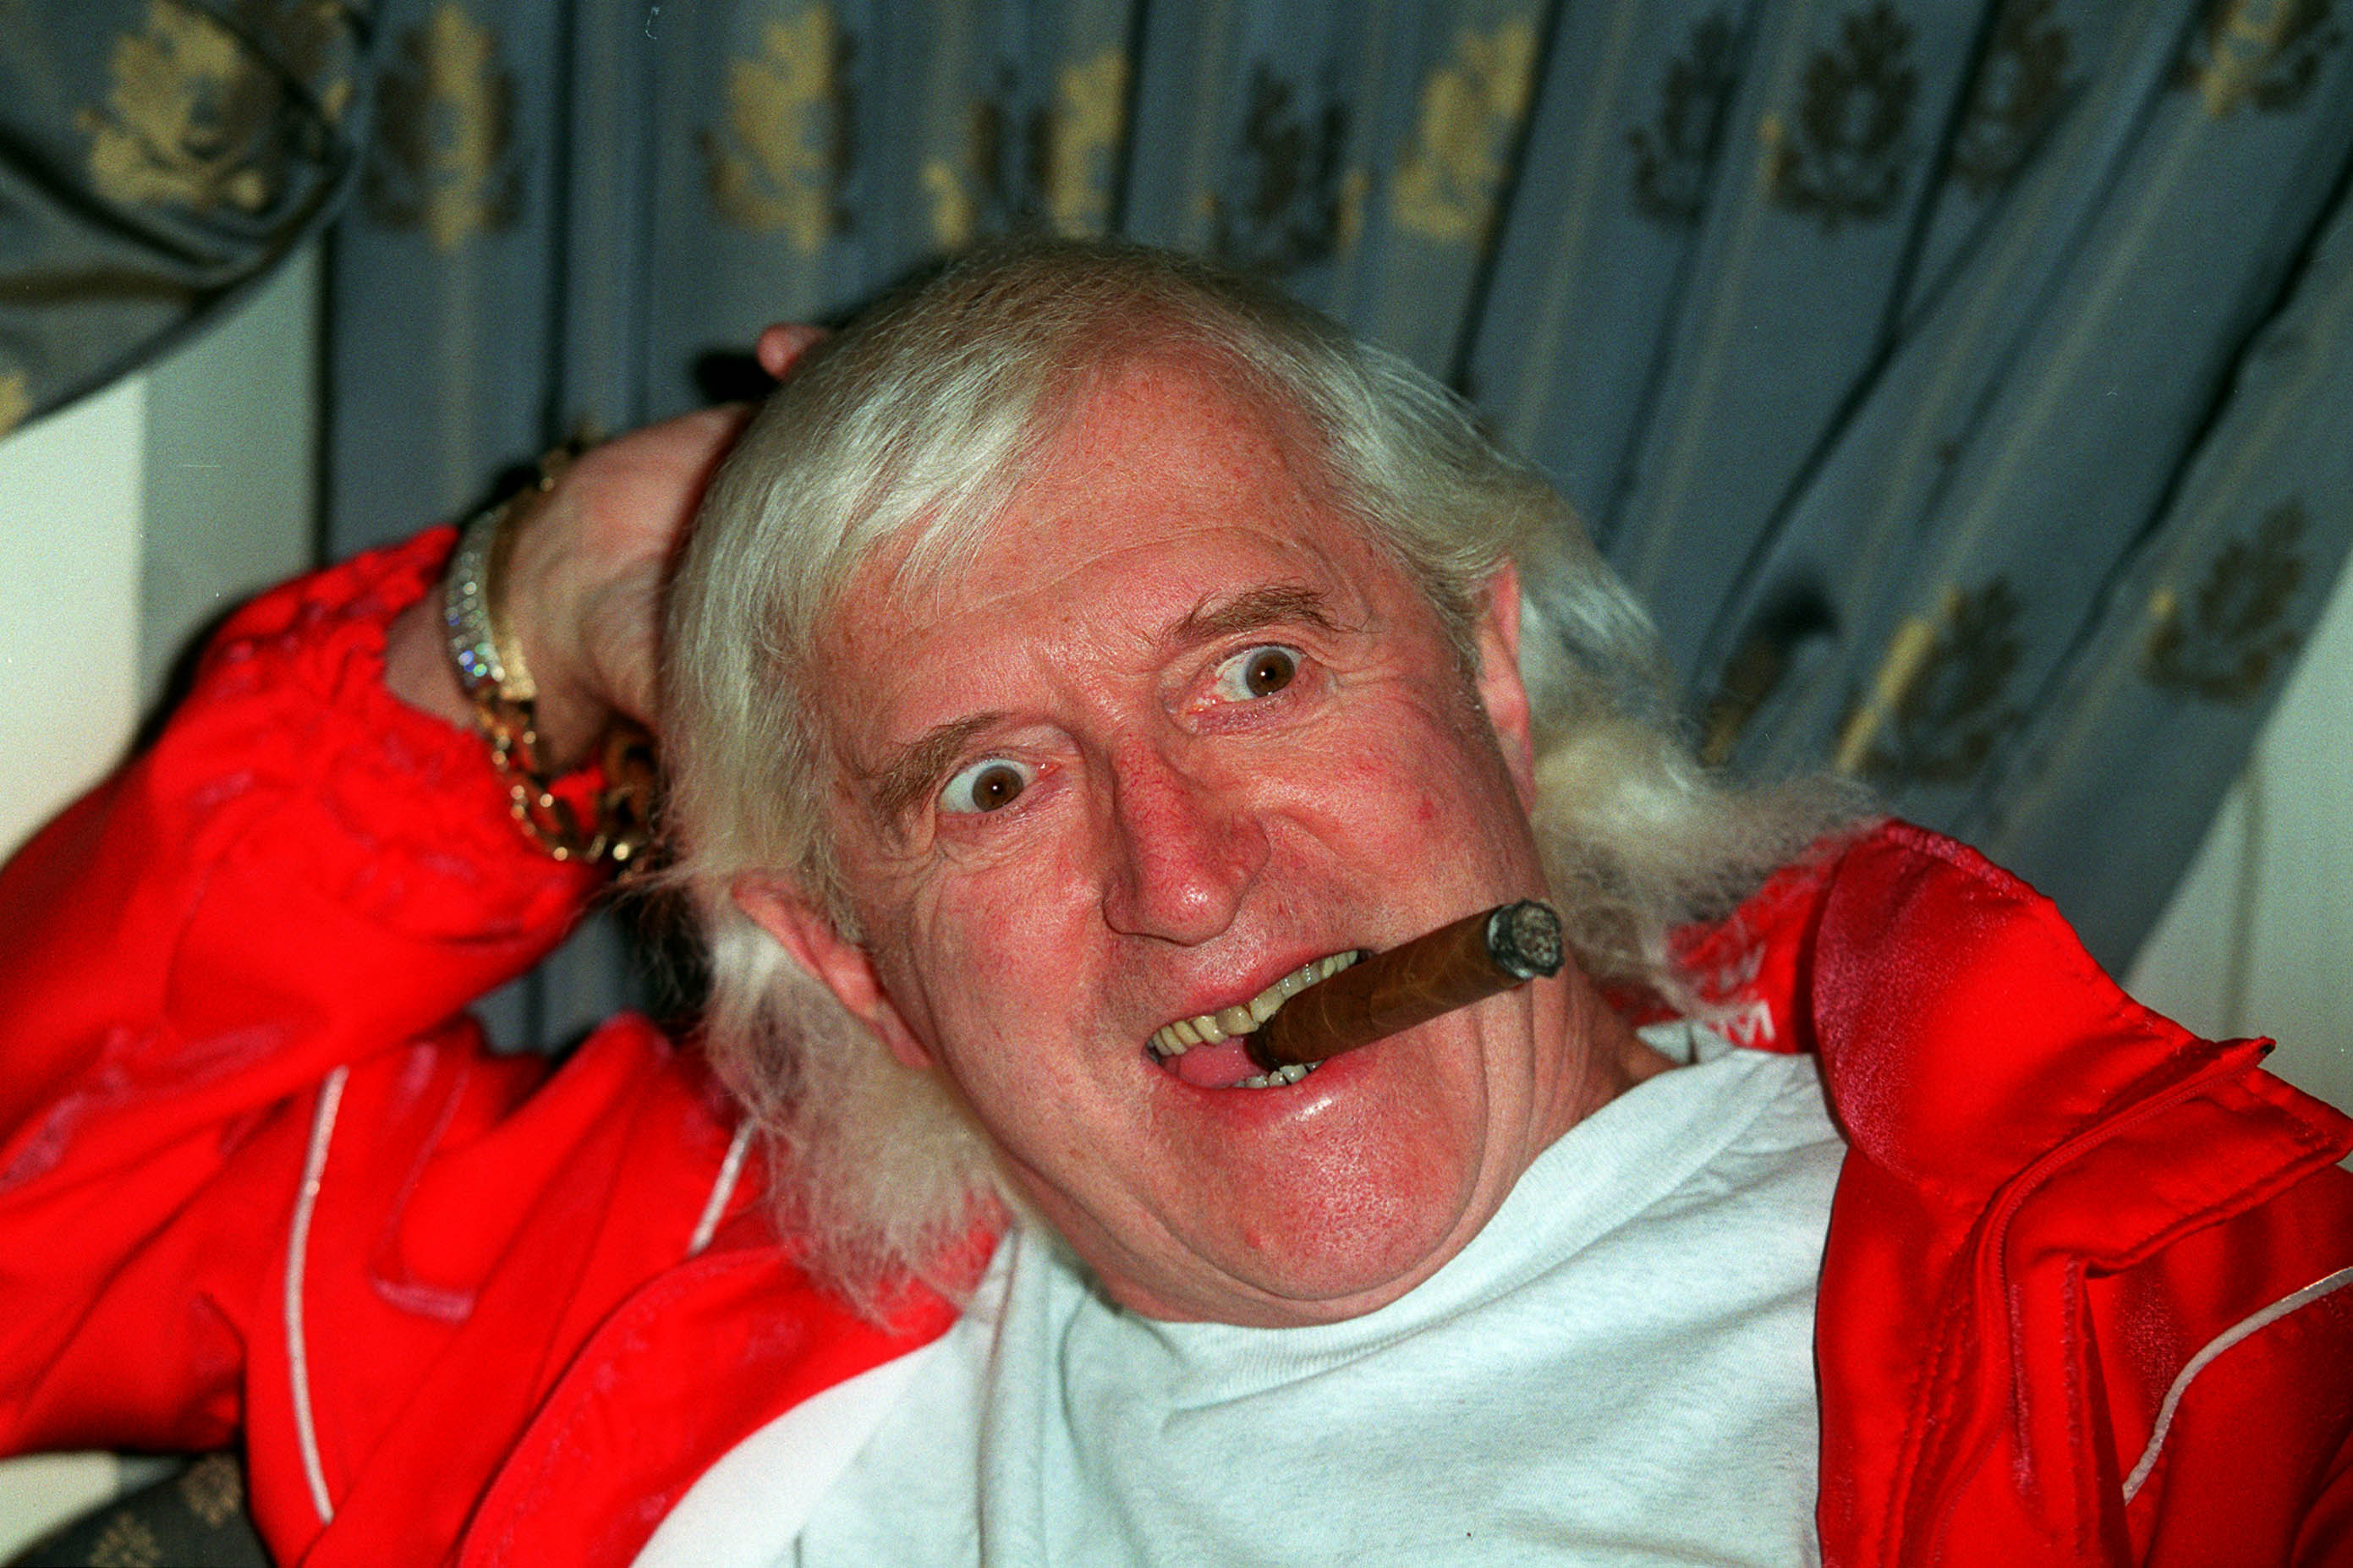 Savile inquiry evidence to be published by BBC